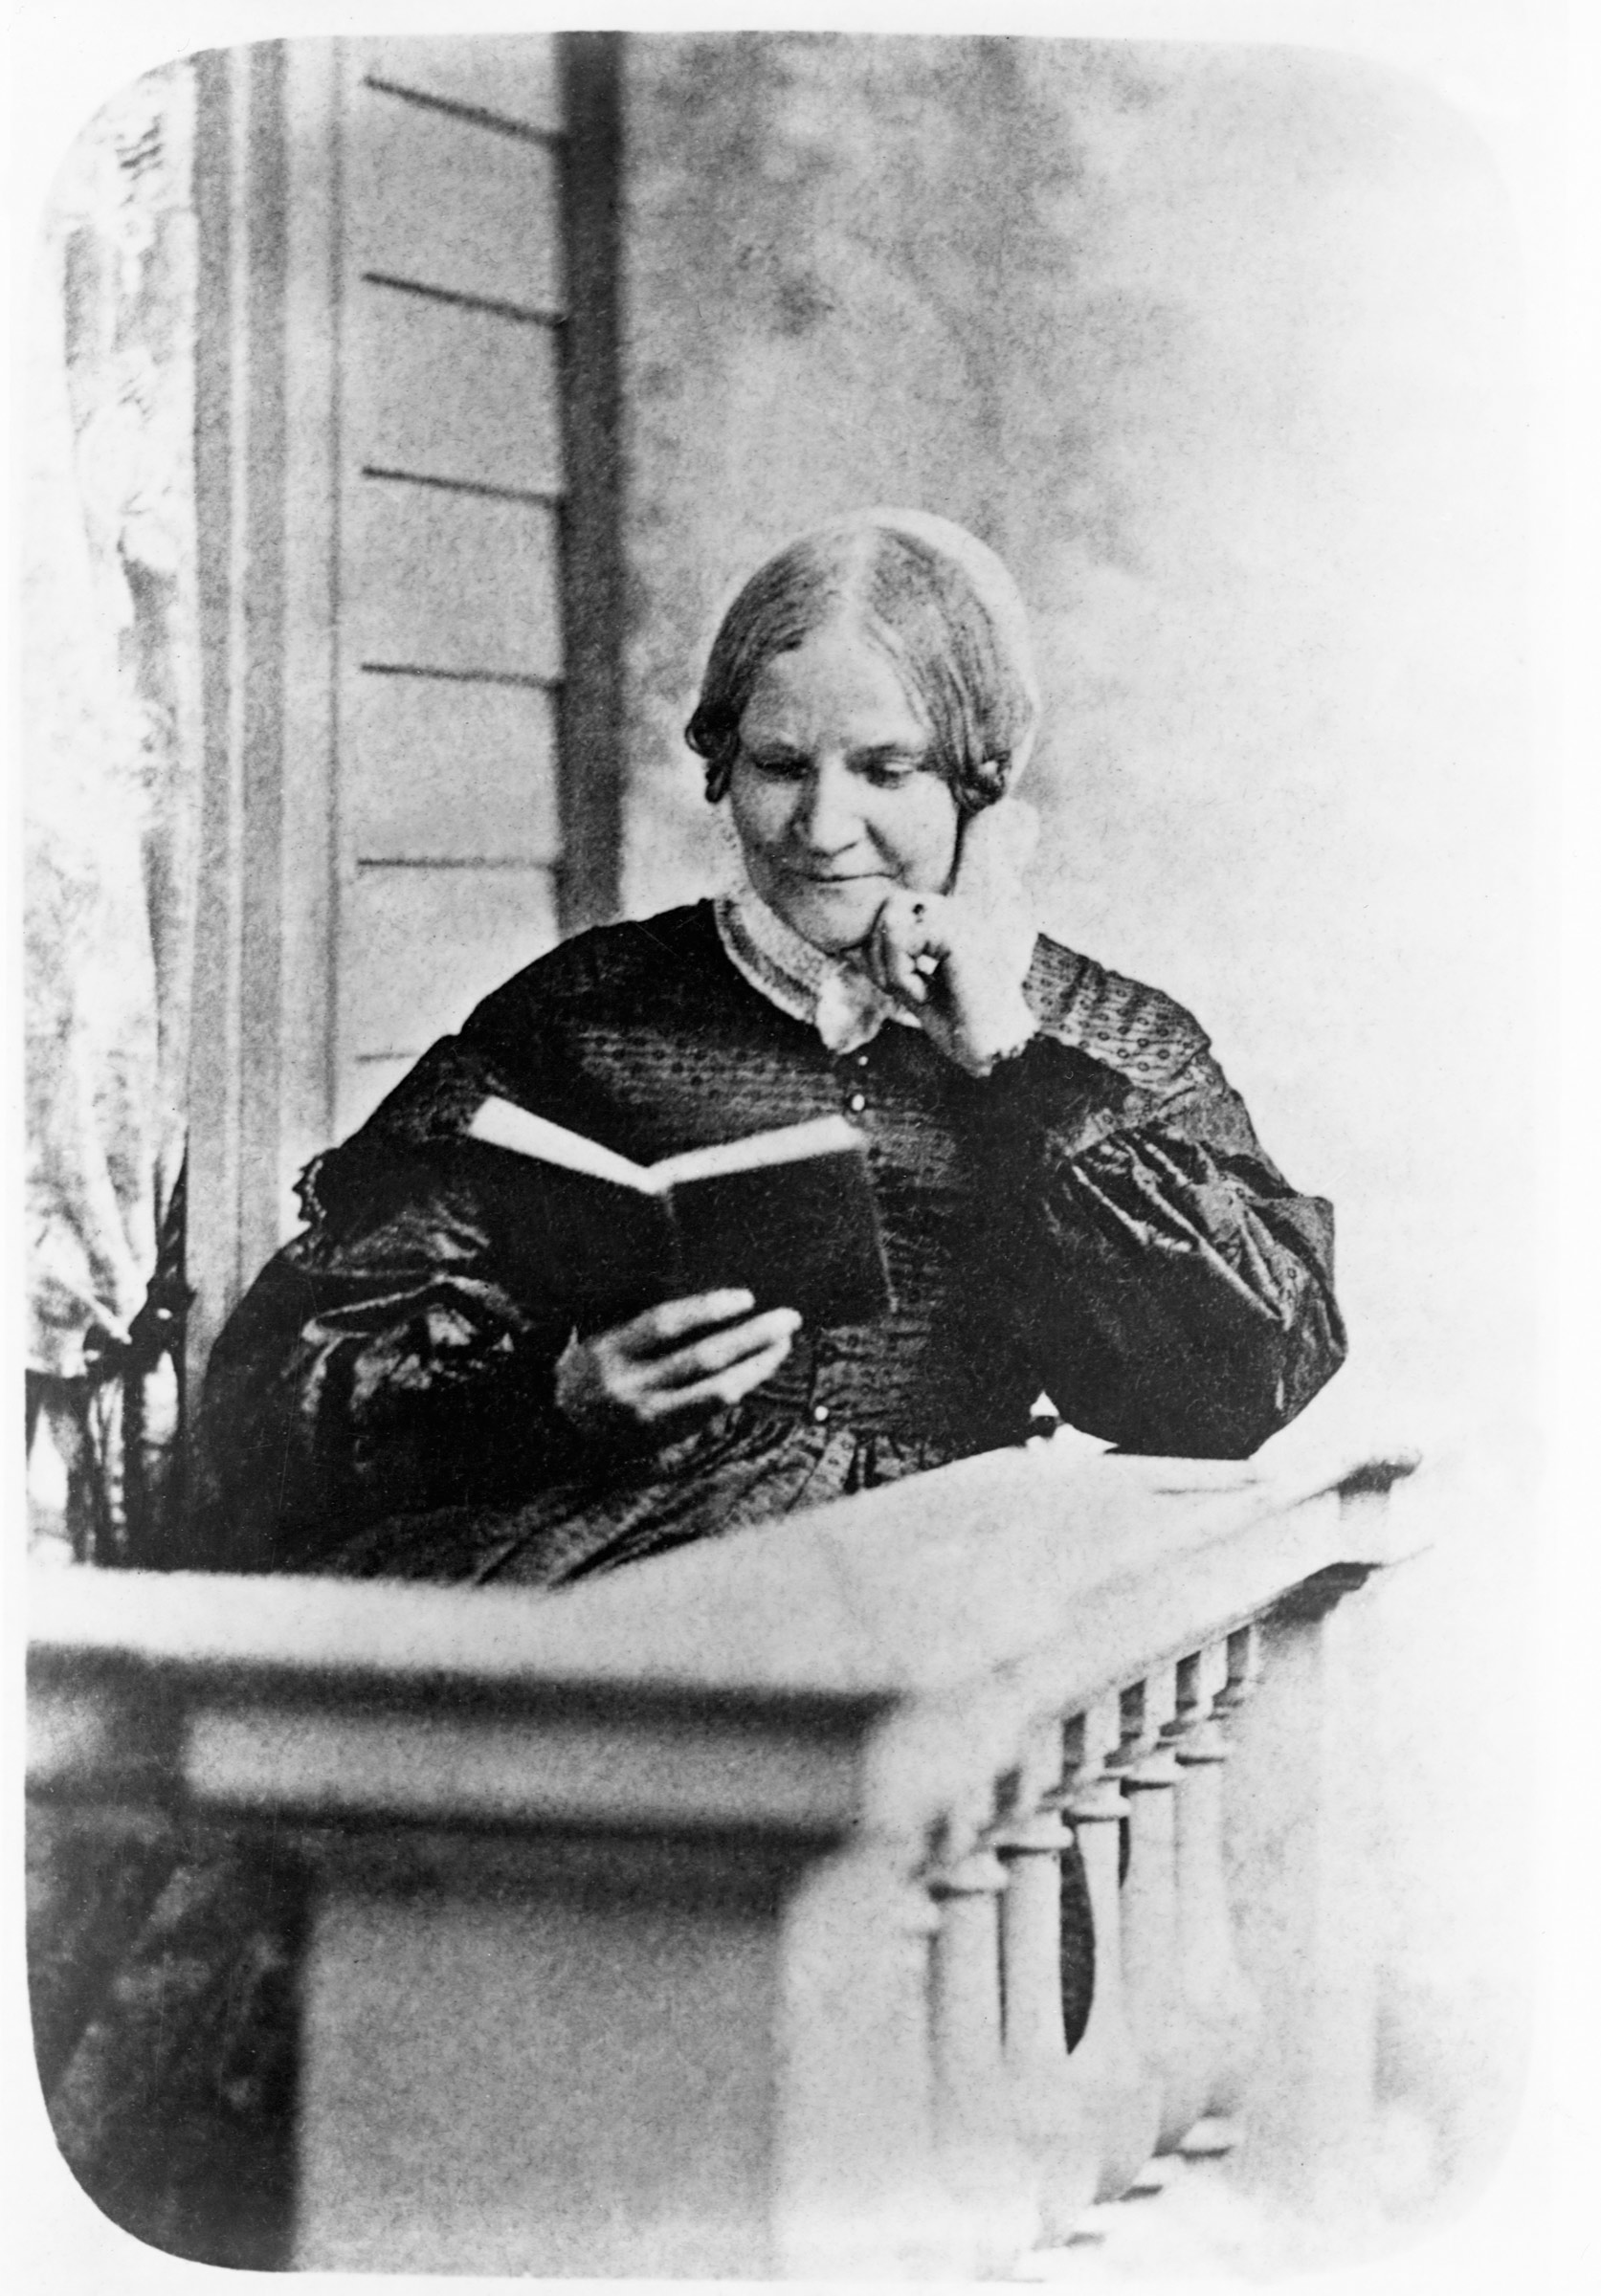 Lydia Maria Child (1802-1880) reads a book on a front porch. Child wrote and edited books promoting the suffragist and abolitionist causes. (Corbis/Getty Images)